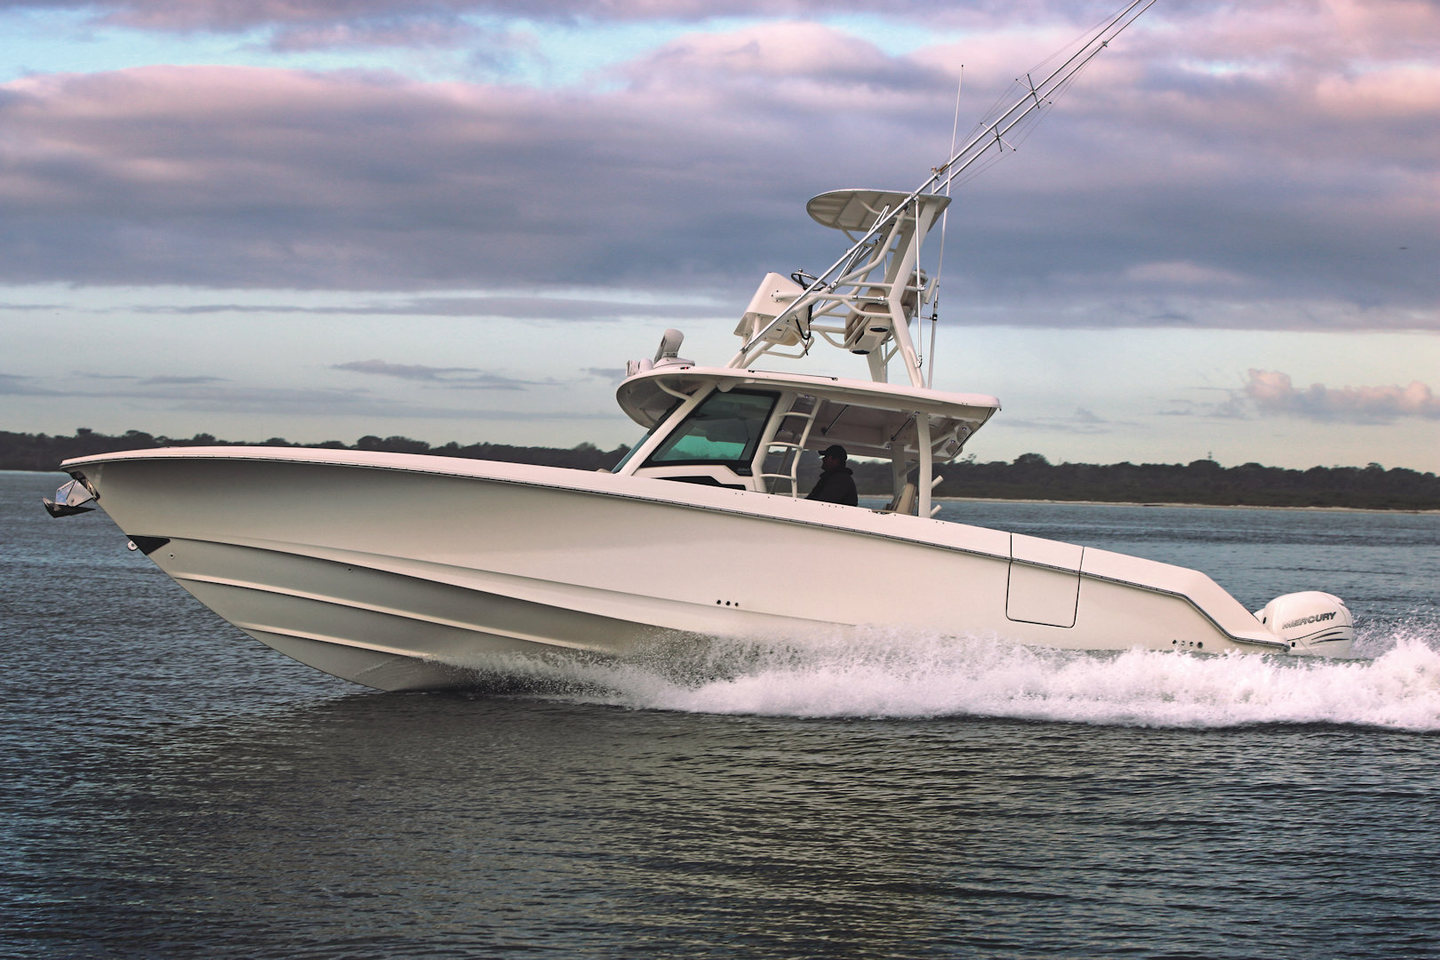 360 VR Virtual Tours of the Boston Whaler 380 Outrage